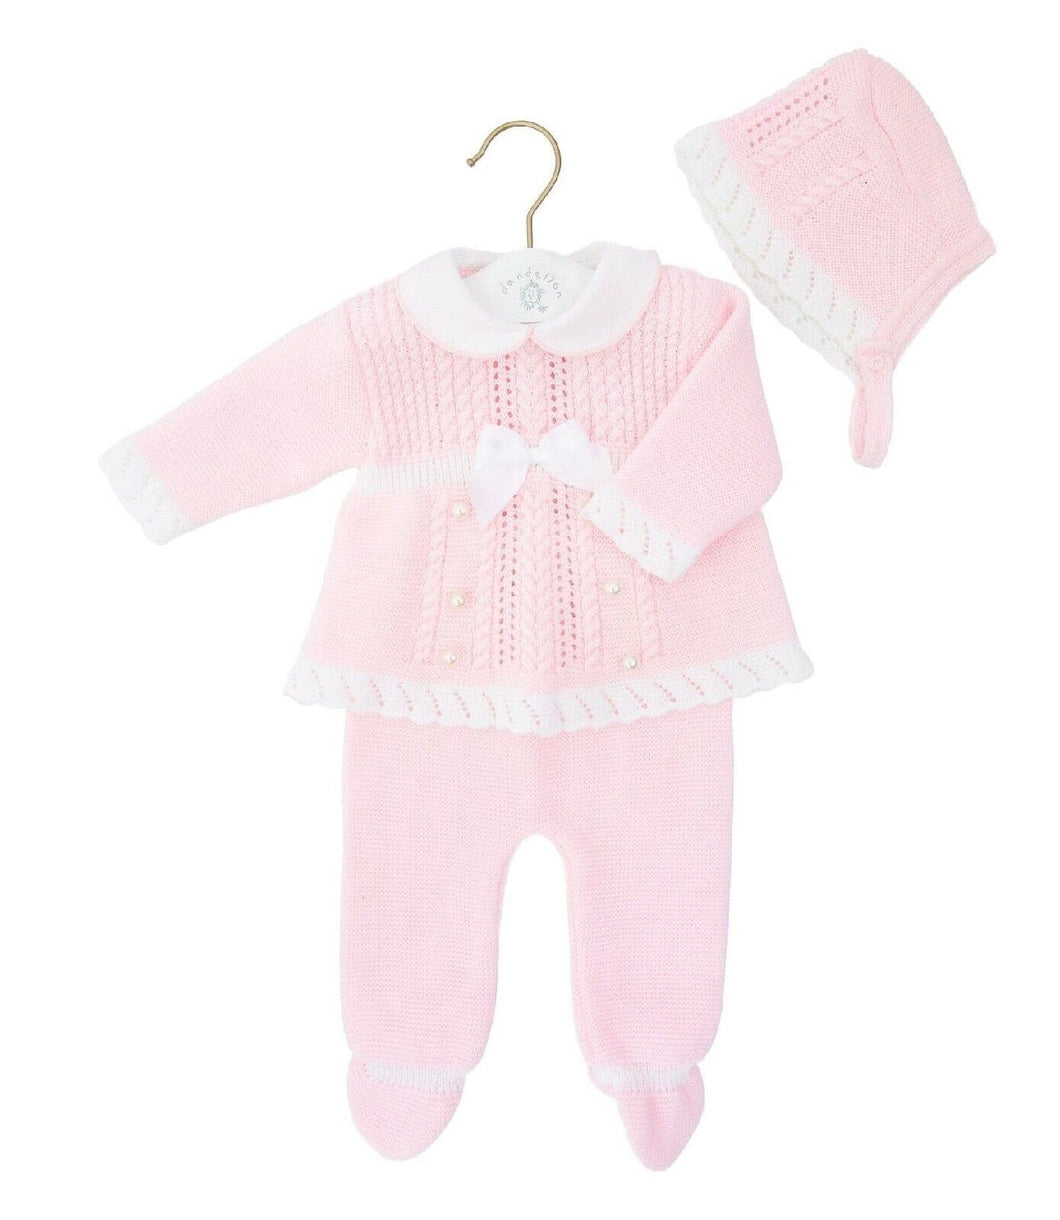 Baby Girls Knitted Set with Bonnet - Dandelion